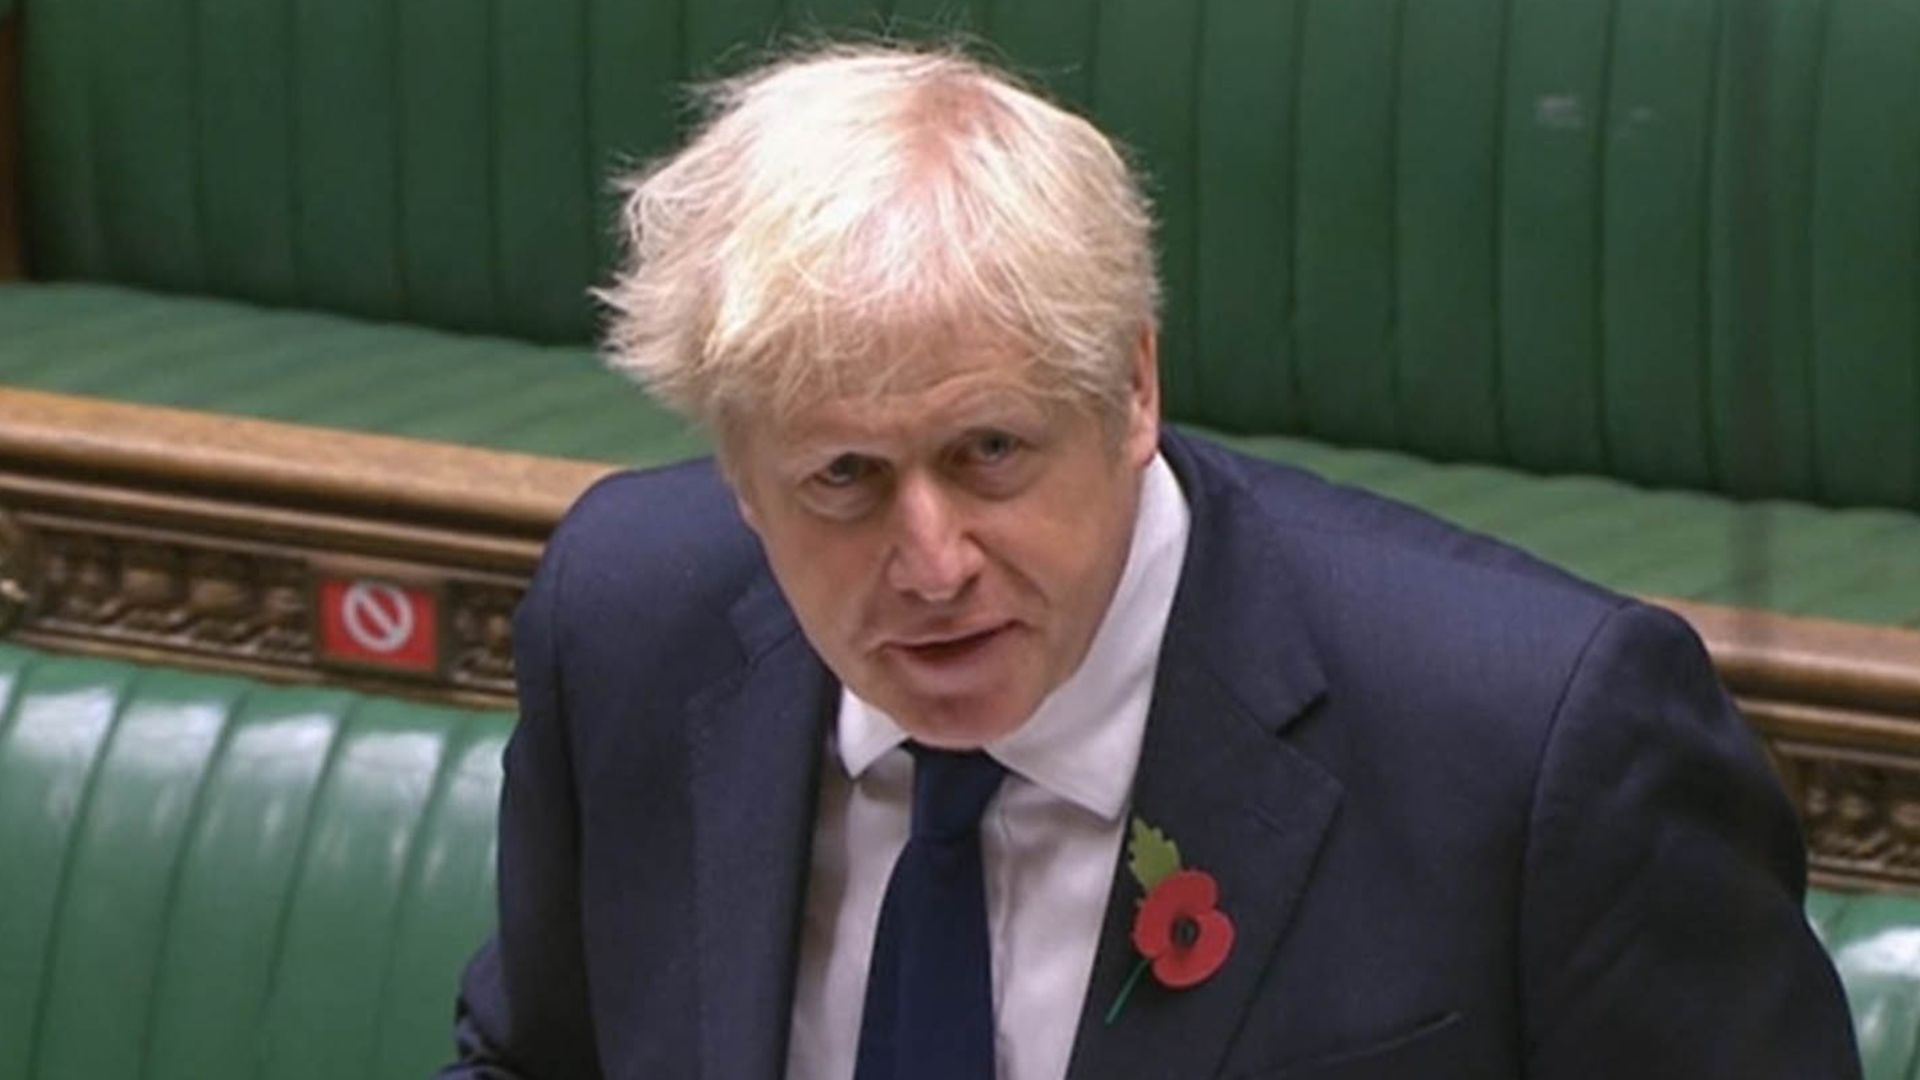 Prime minister Boris Johnson speaks during Prime Minister's Questions in the House of Commons, London. - Credit: PA